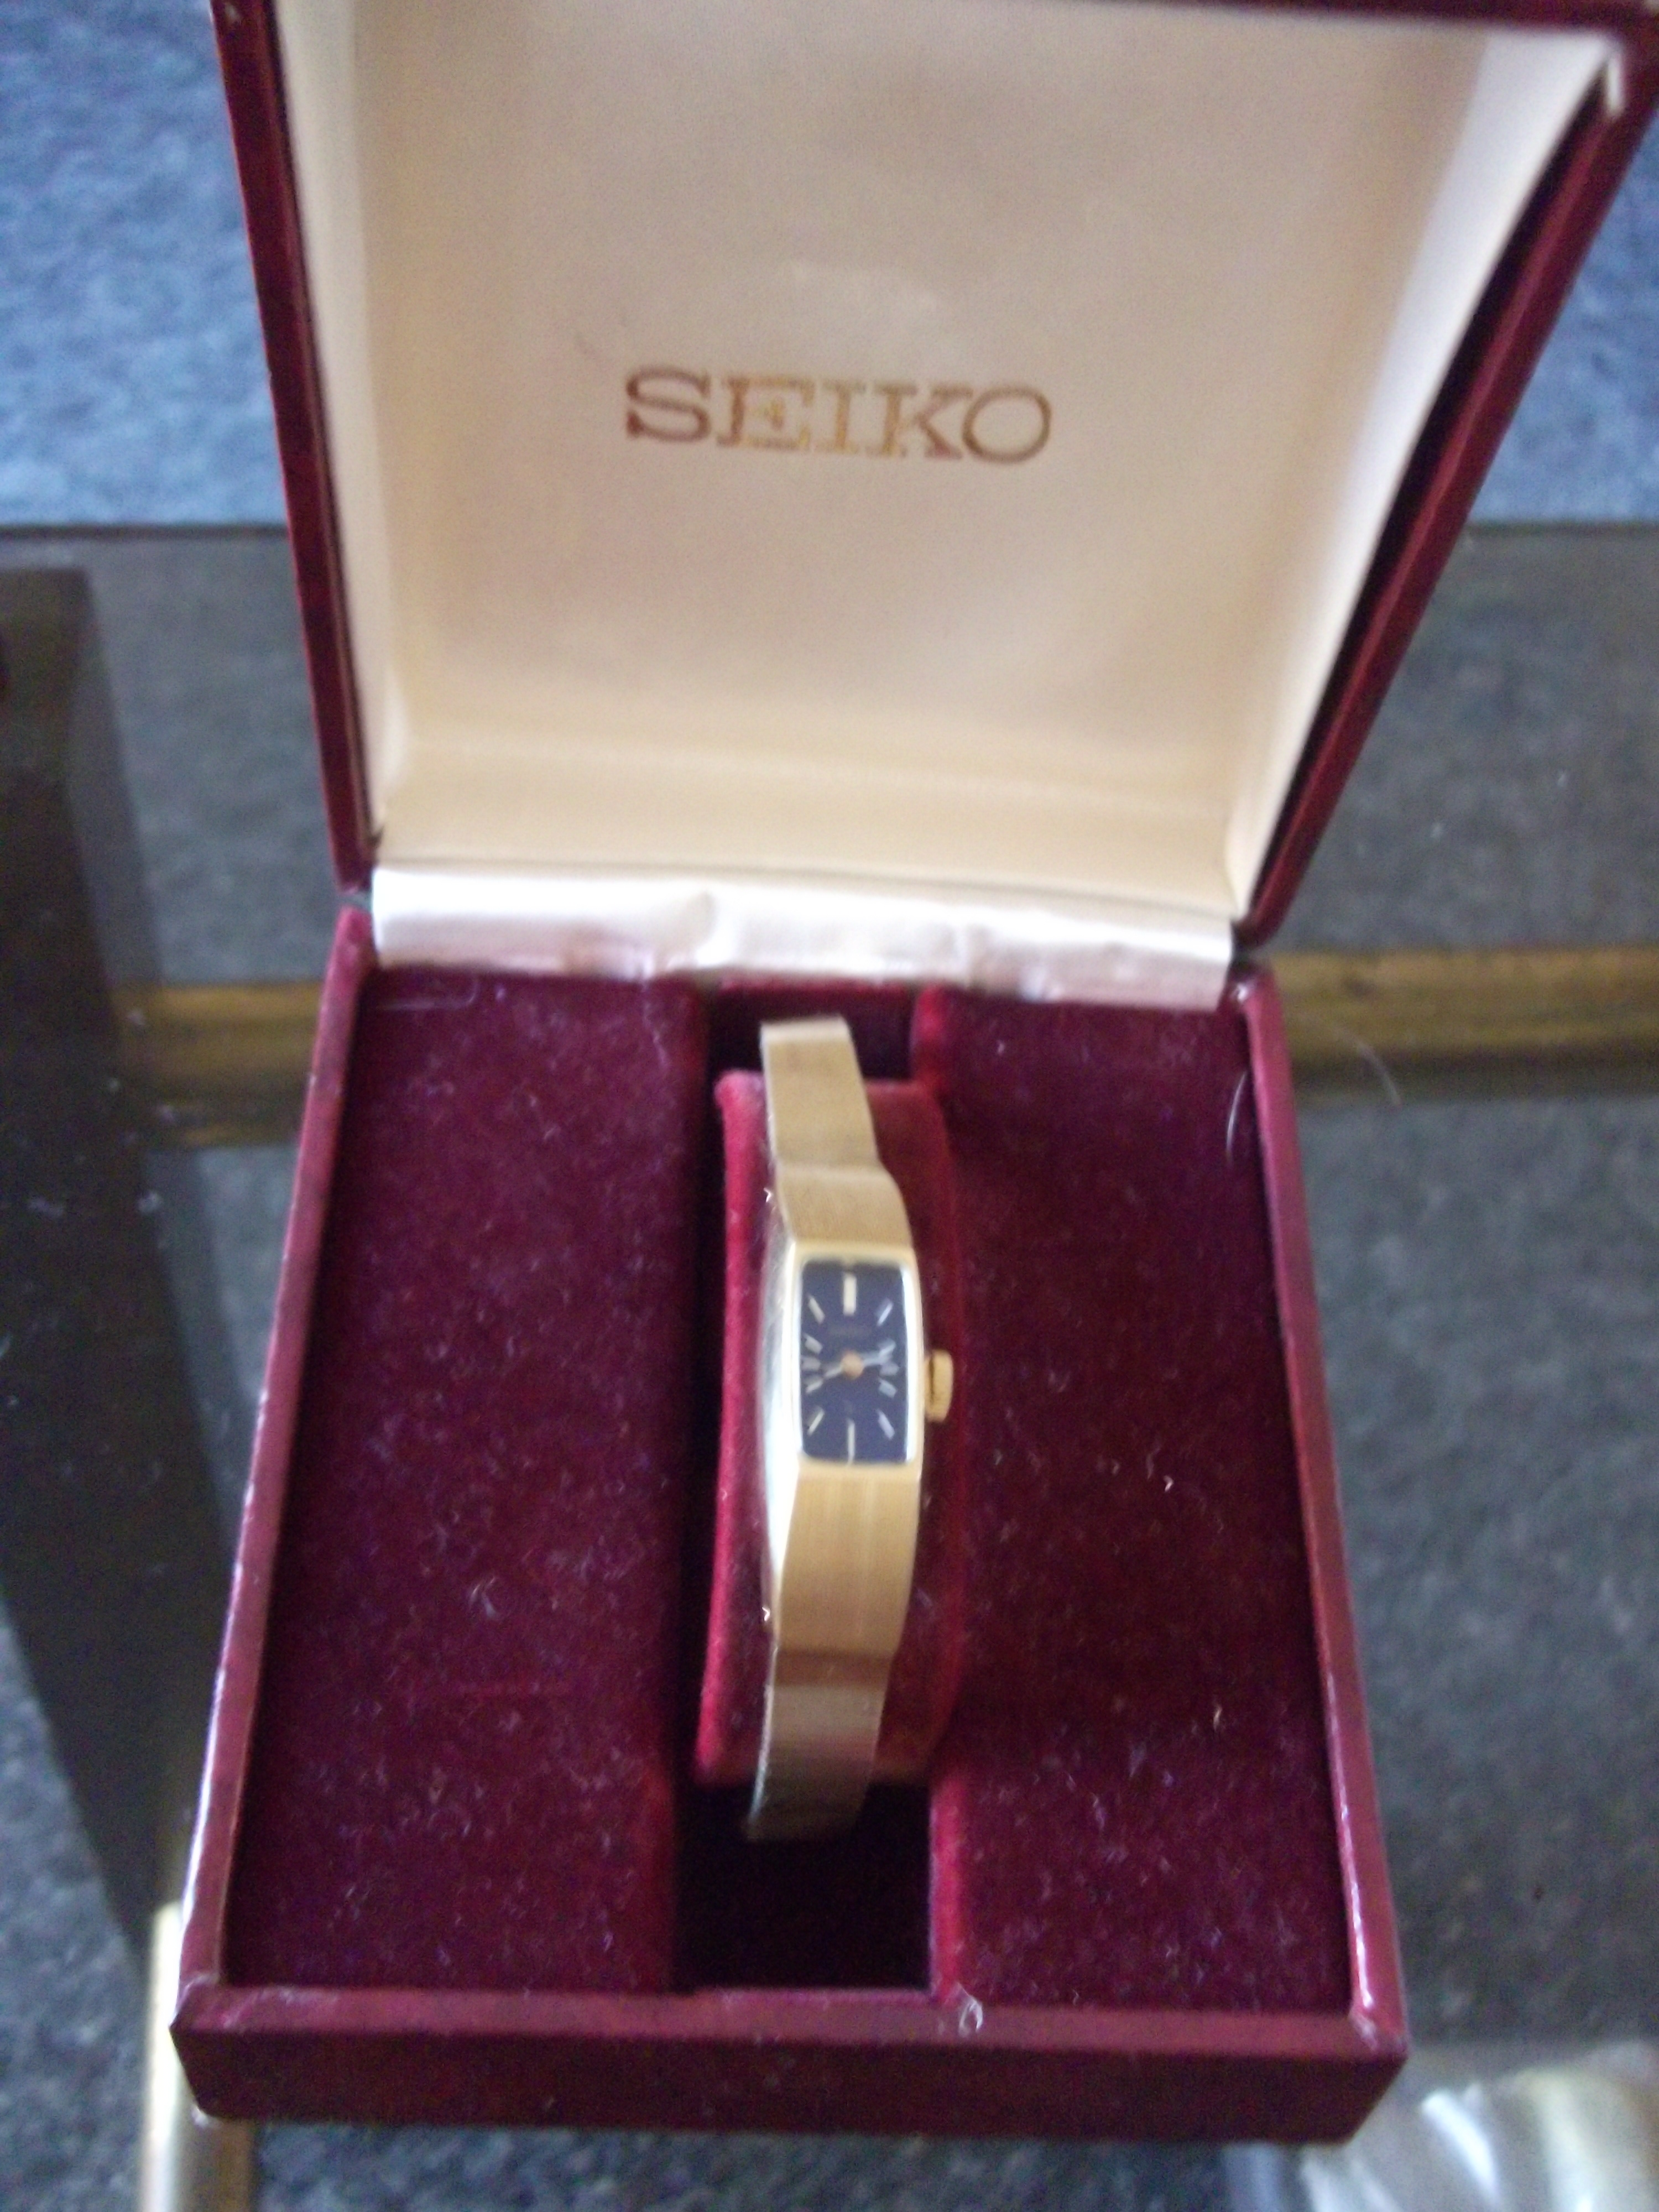 We Have a Trade! The Seiko Watch | The Teinannie Wedding Fund Project